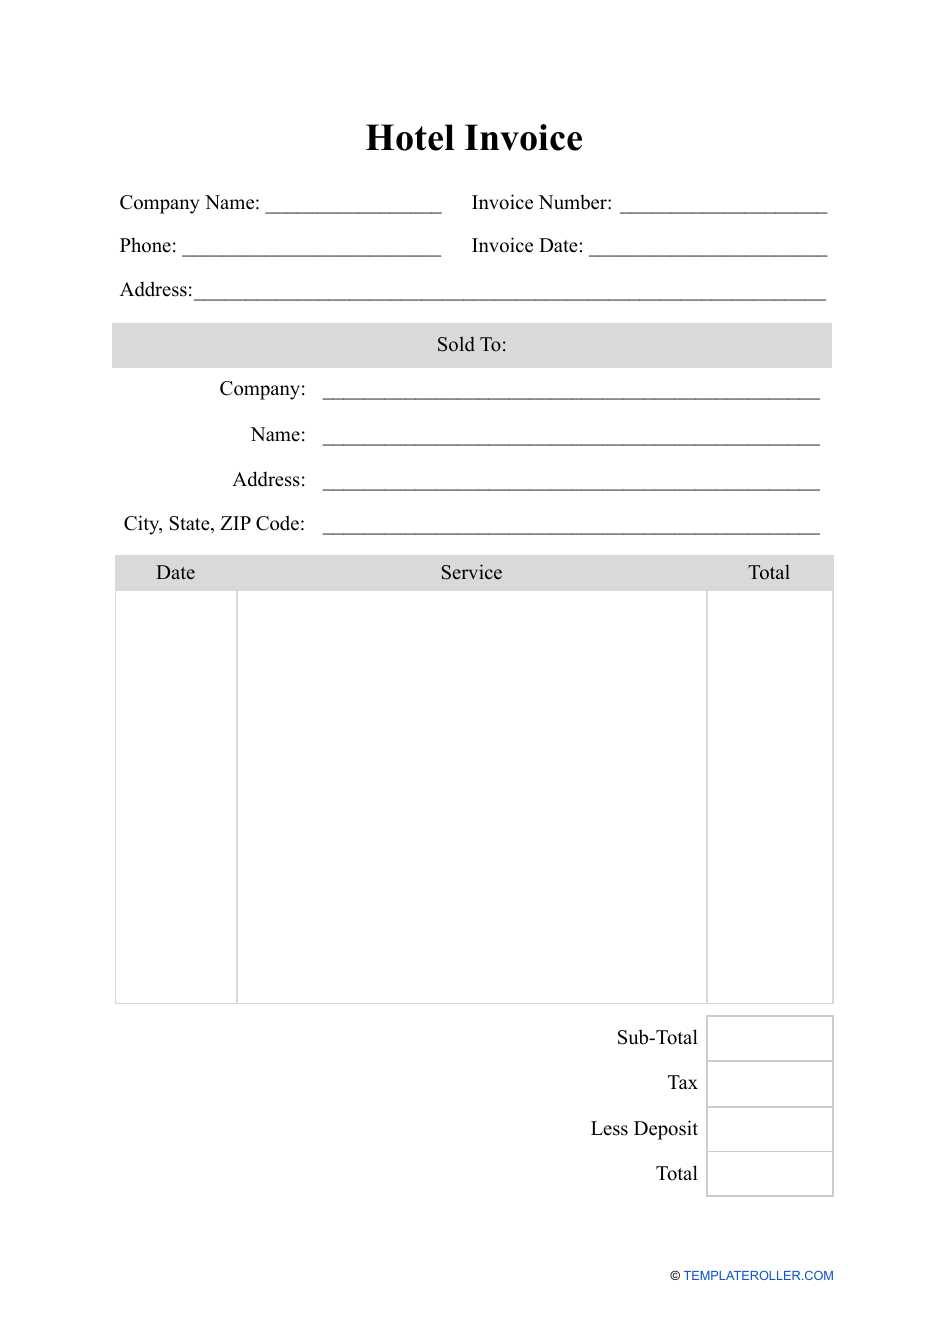 Hotel Invoice Template, Page 1